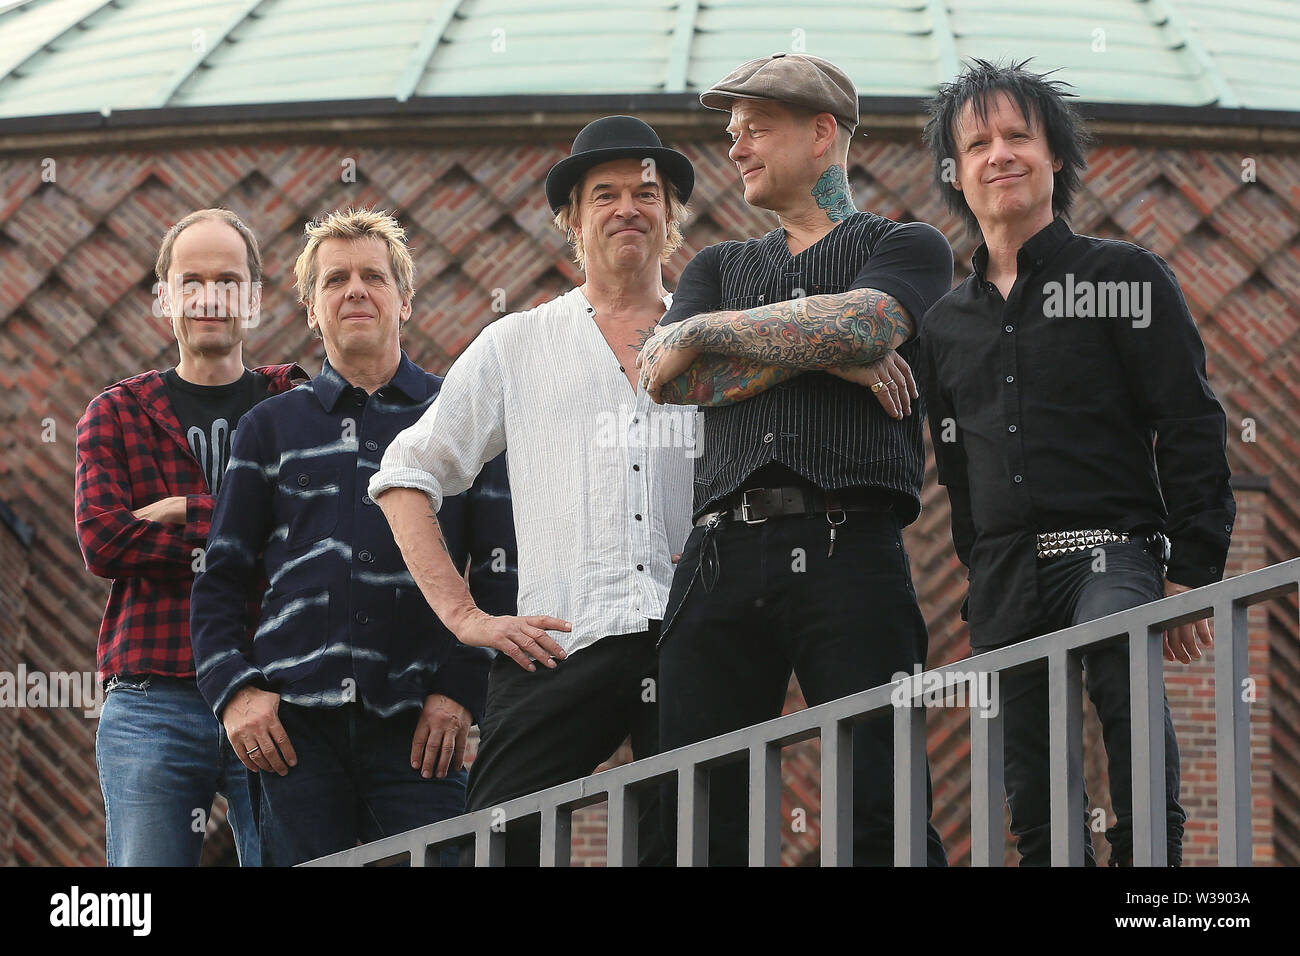 Andreas Von Holst Band Die Toten Hosen High Resolution Stock Photography  and Images - Alamy